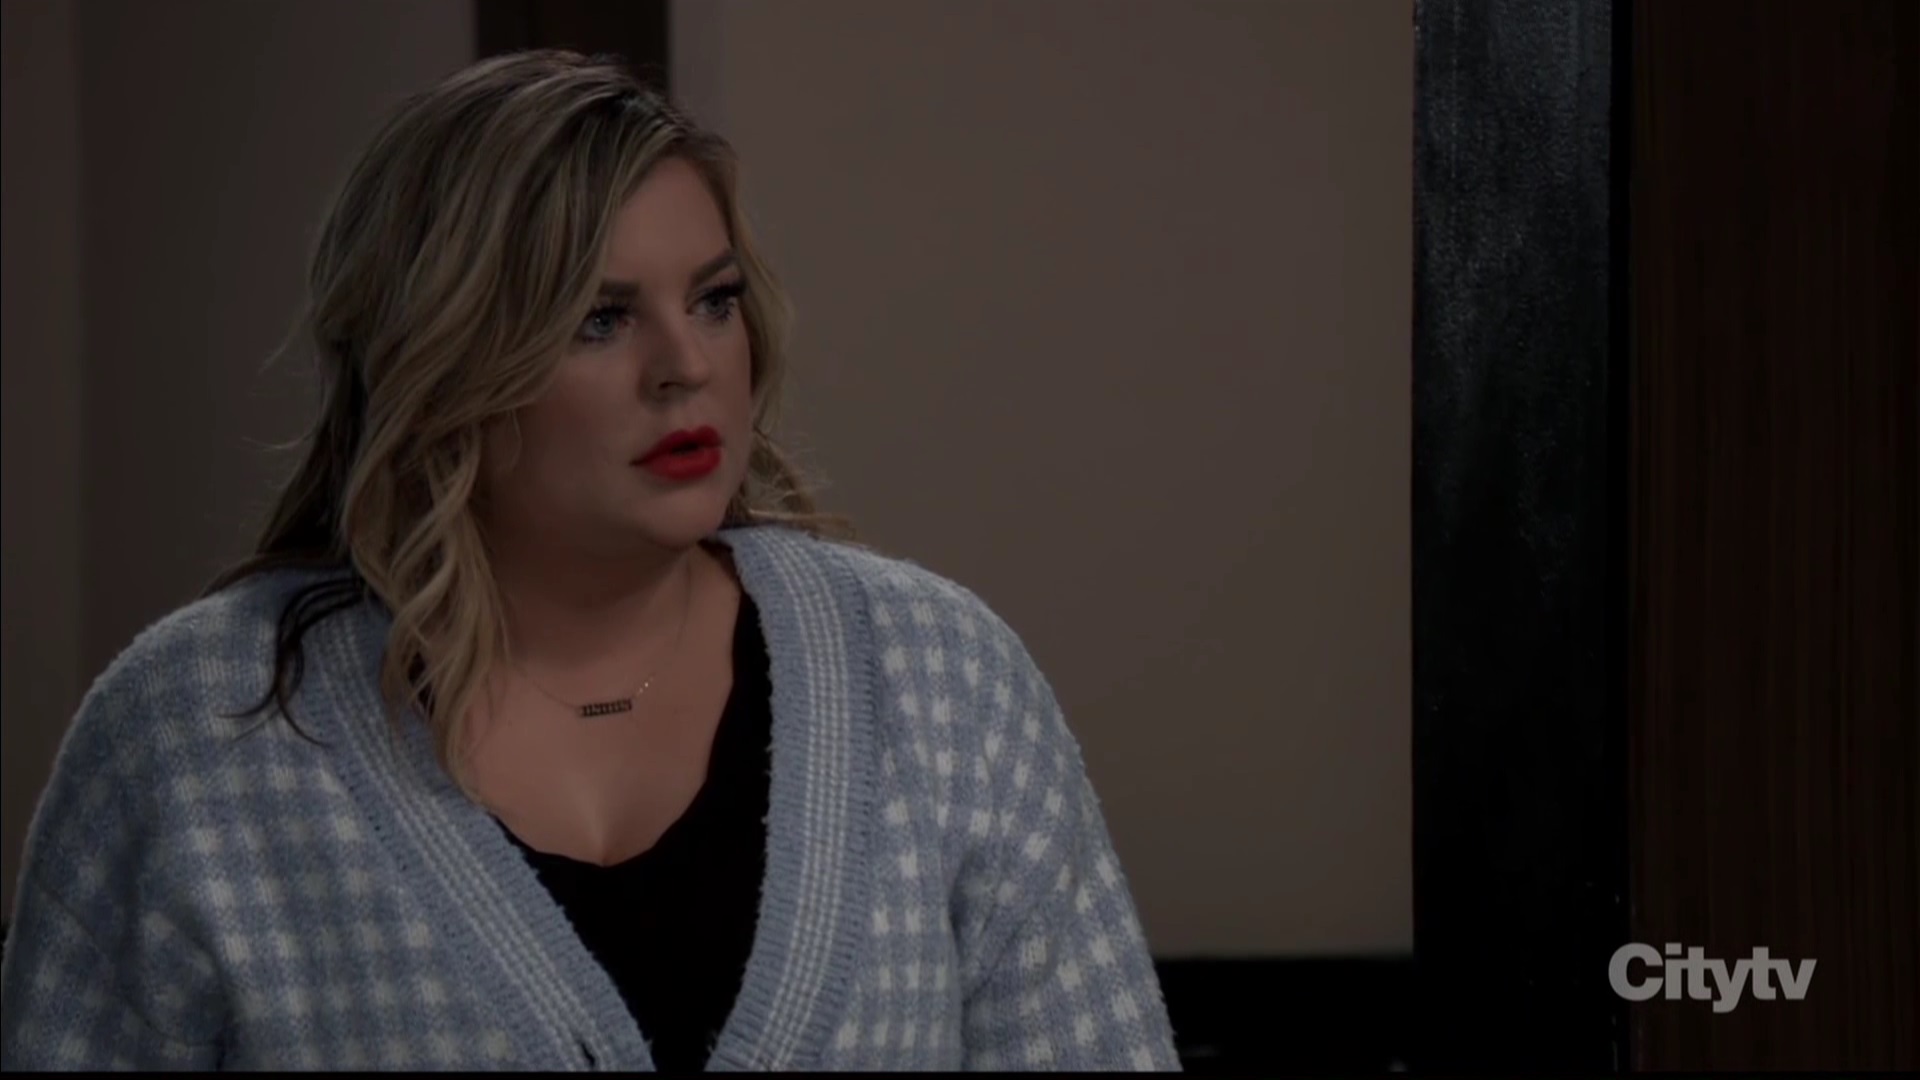 maxie shocked to see lucy